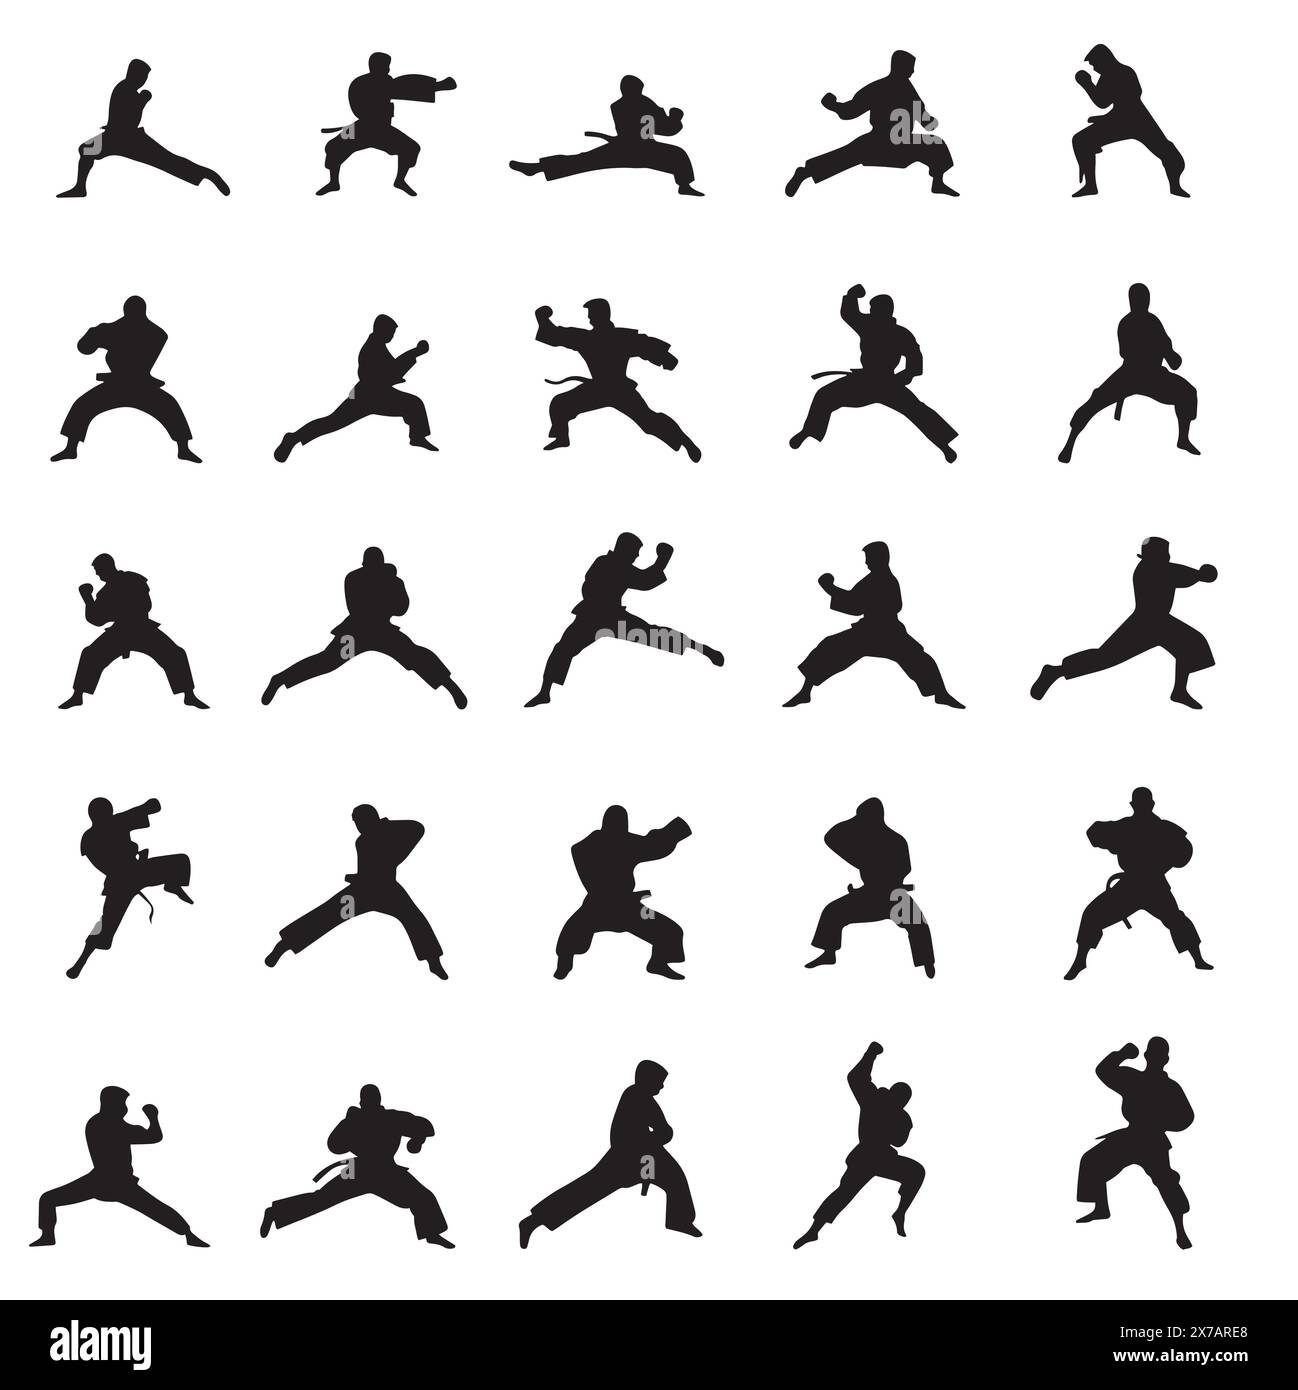 Silhouette Vector for a Karate man doing multiple moves, Martial arts Silhouettes. Stock Vector